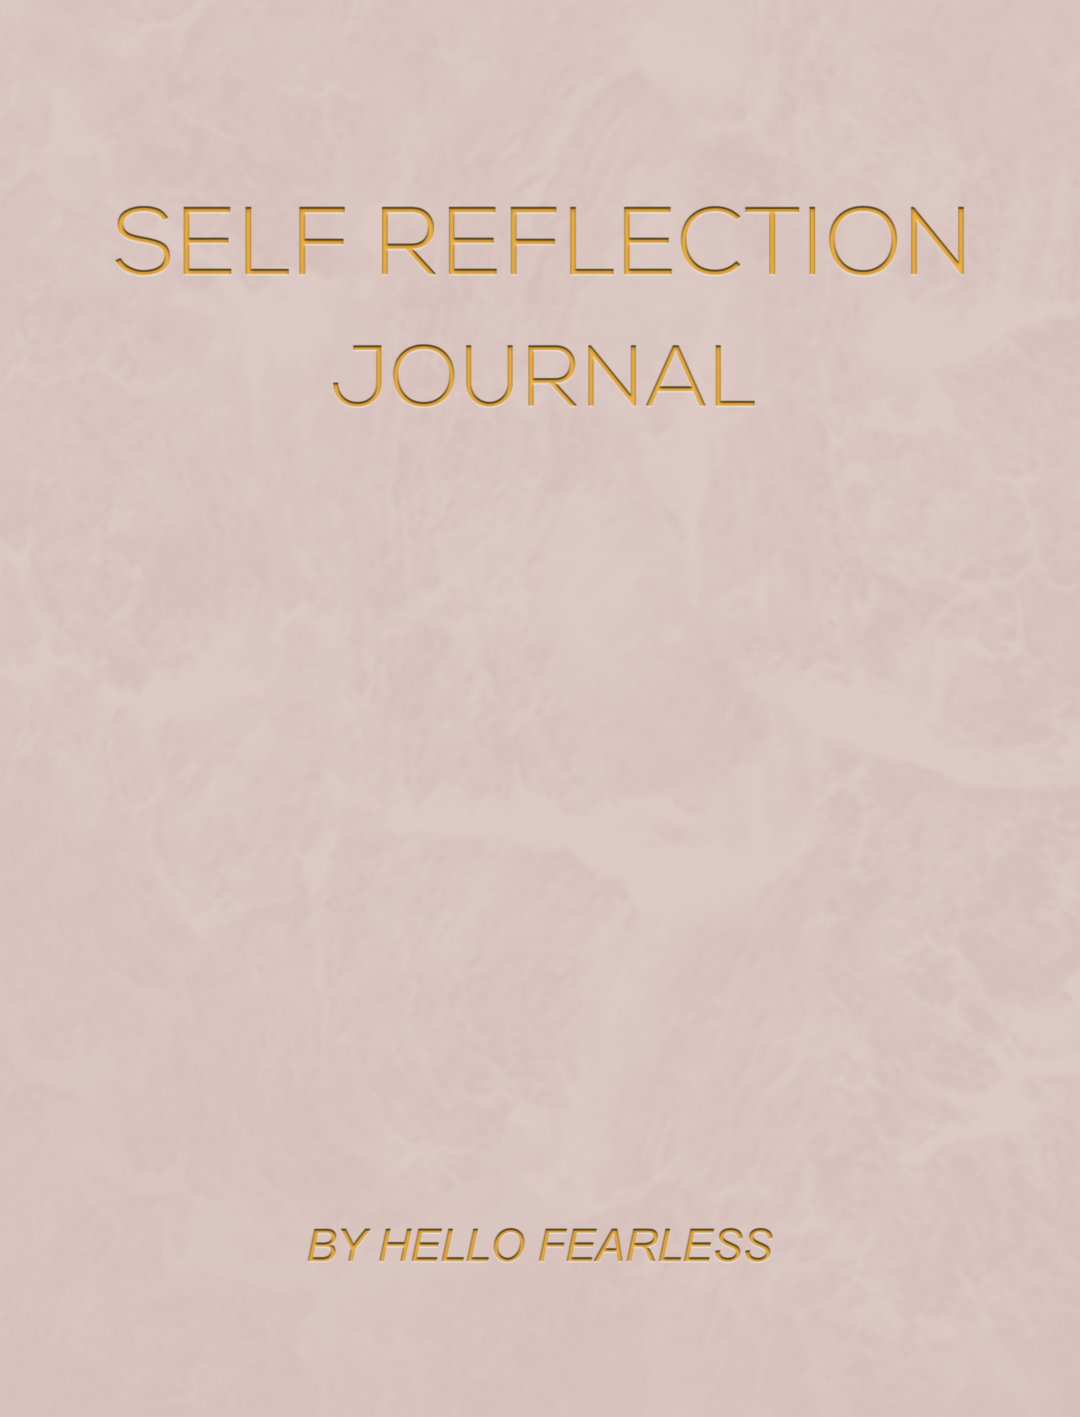 Meaningful Self-Reflection Journal